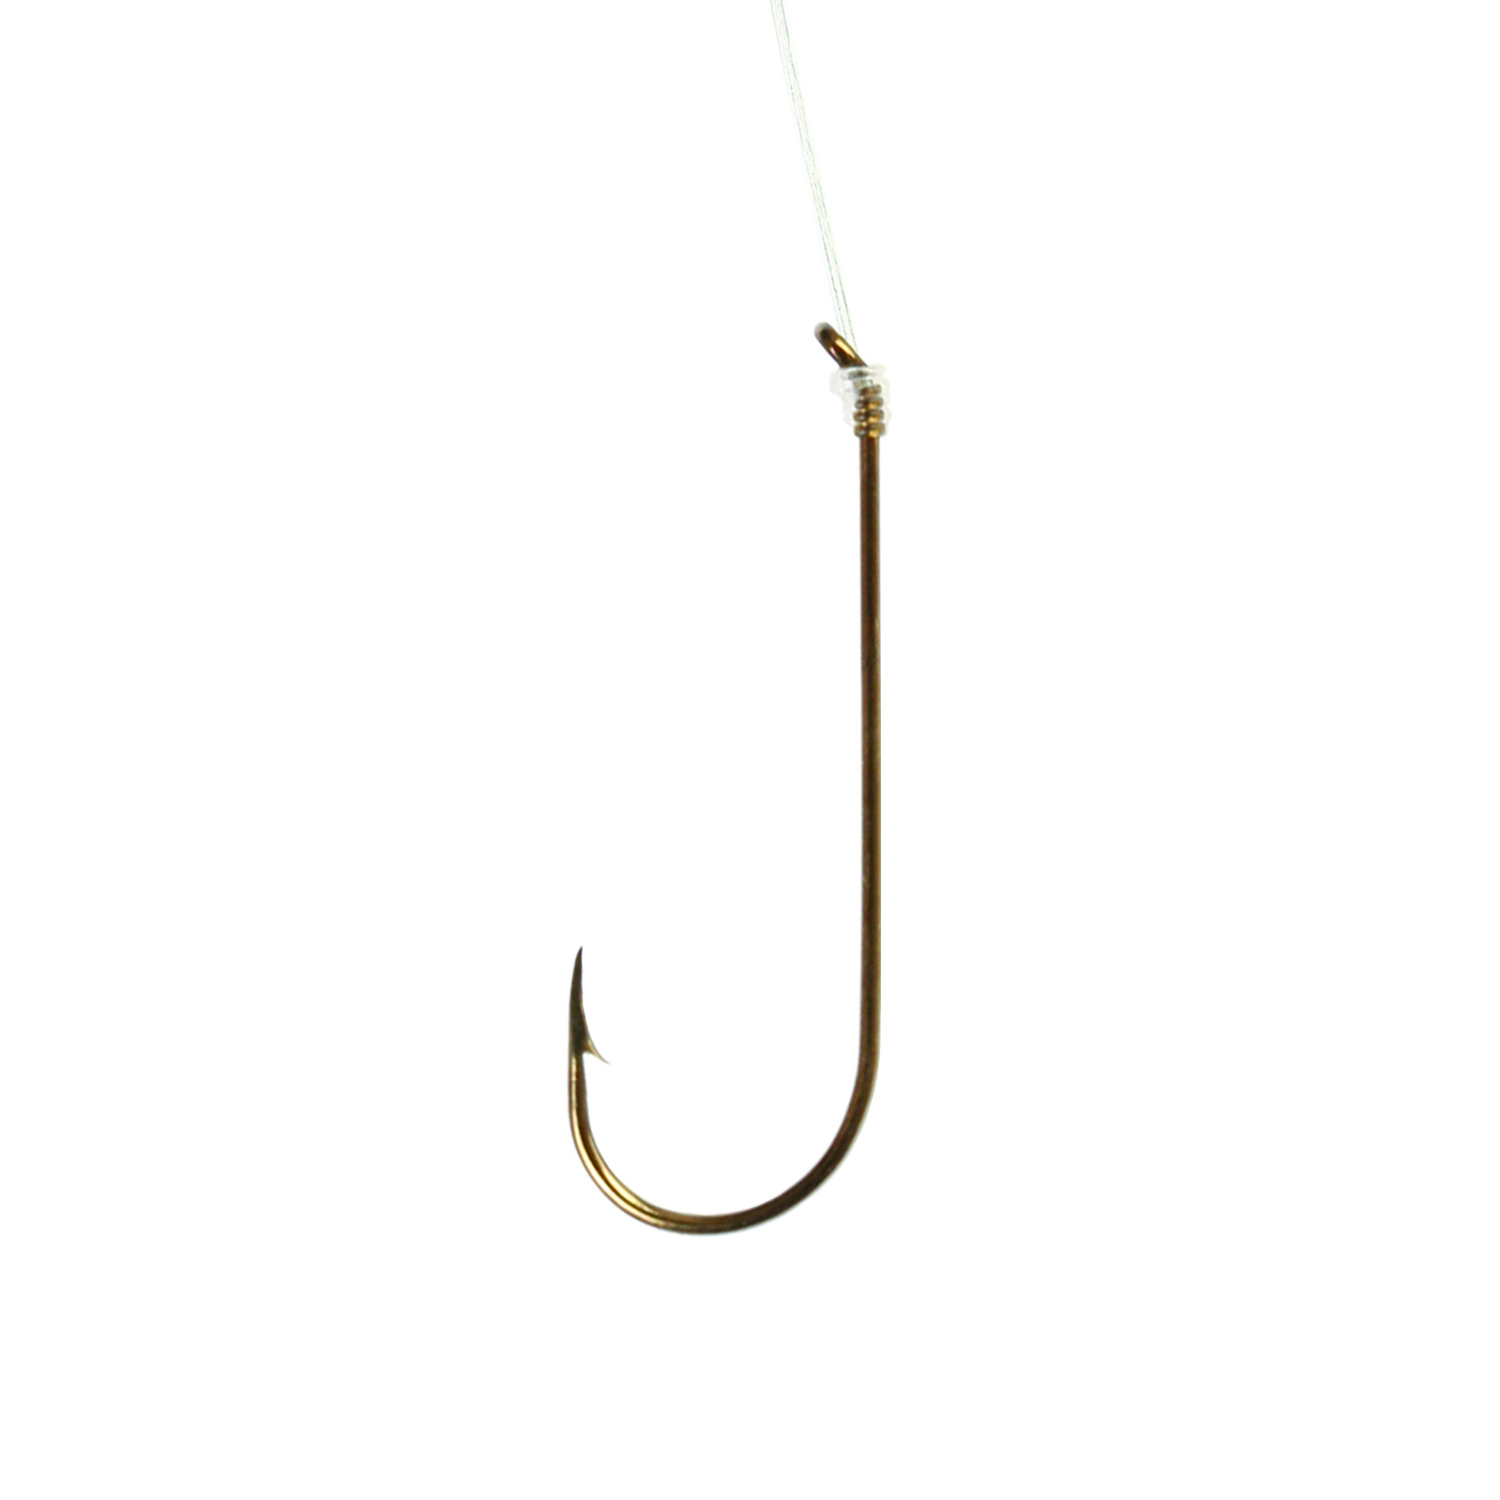 Eagle Claw Aberdeen Snelled Hook, Non-Offset, Down Eye, 1x Long